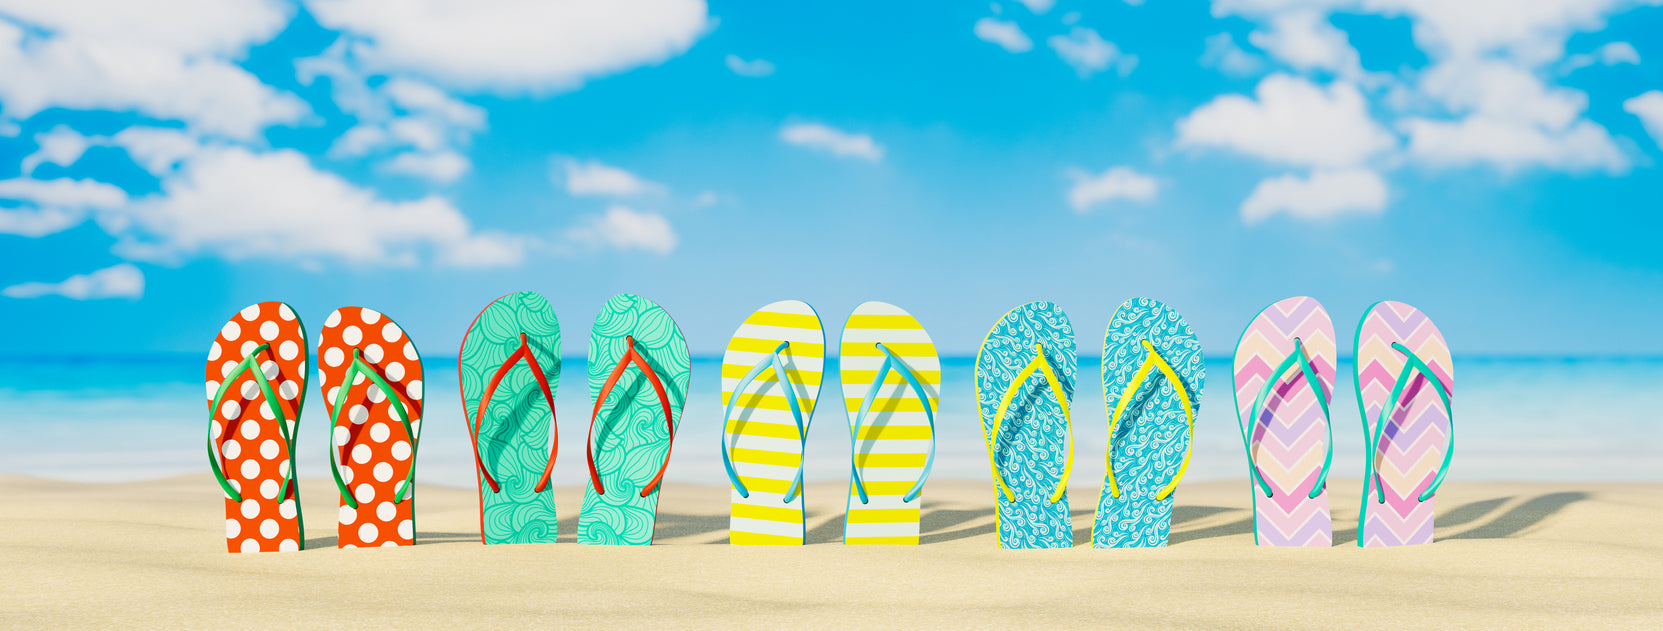 Wholesale and Bulk Flip Flops: They're Not Just for Summer Anymore